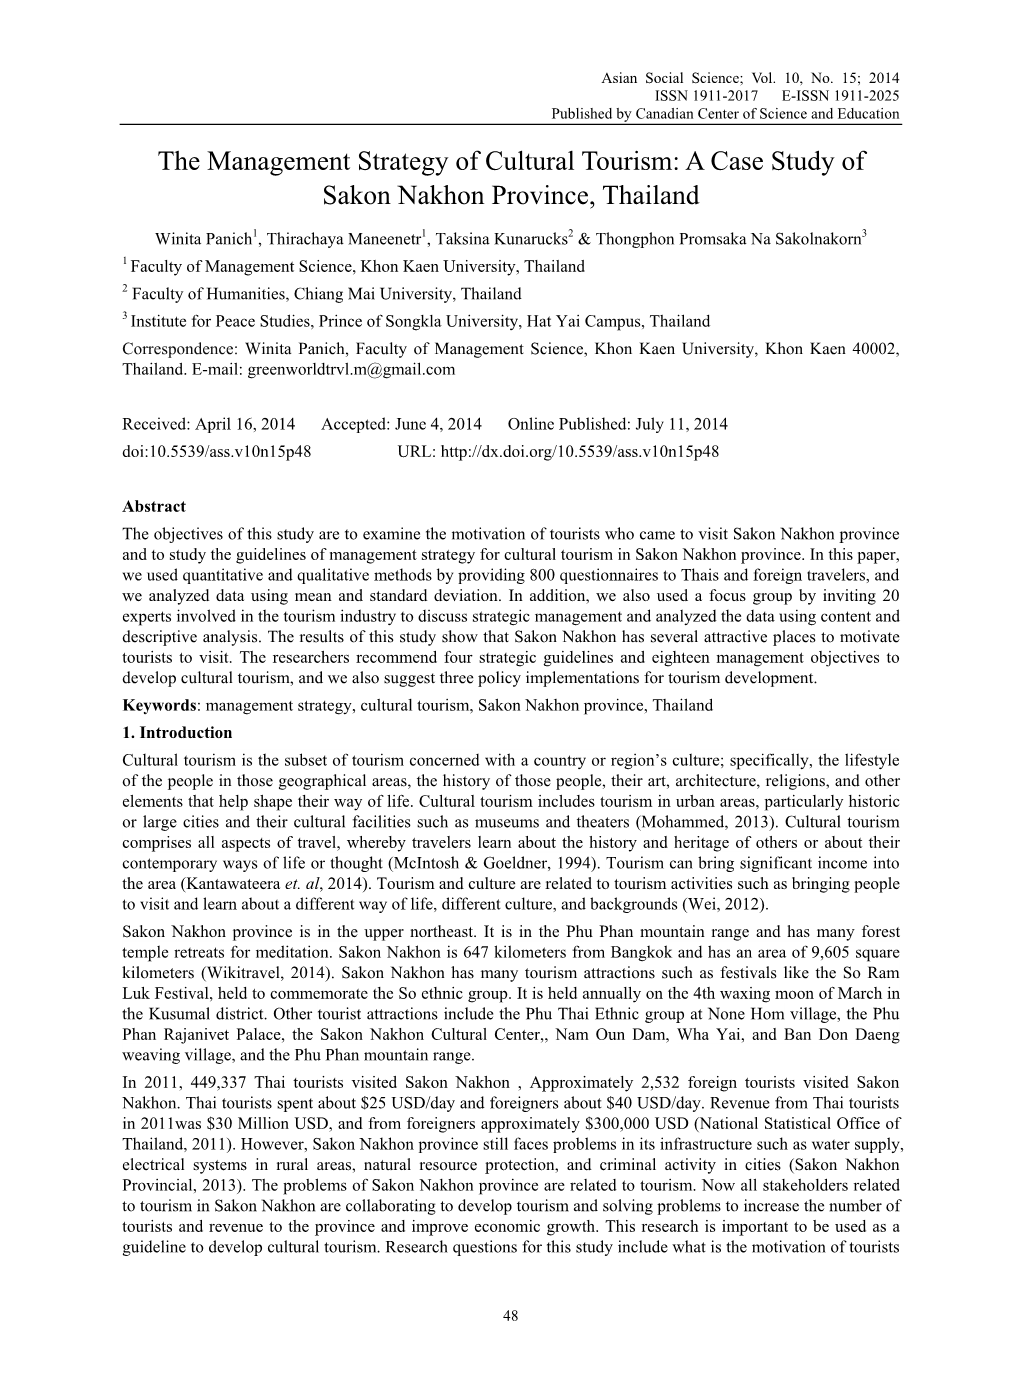 The Management Strategy of Cultural Tourism: a Case Study of Sakon Nakhon Province, Thailand